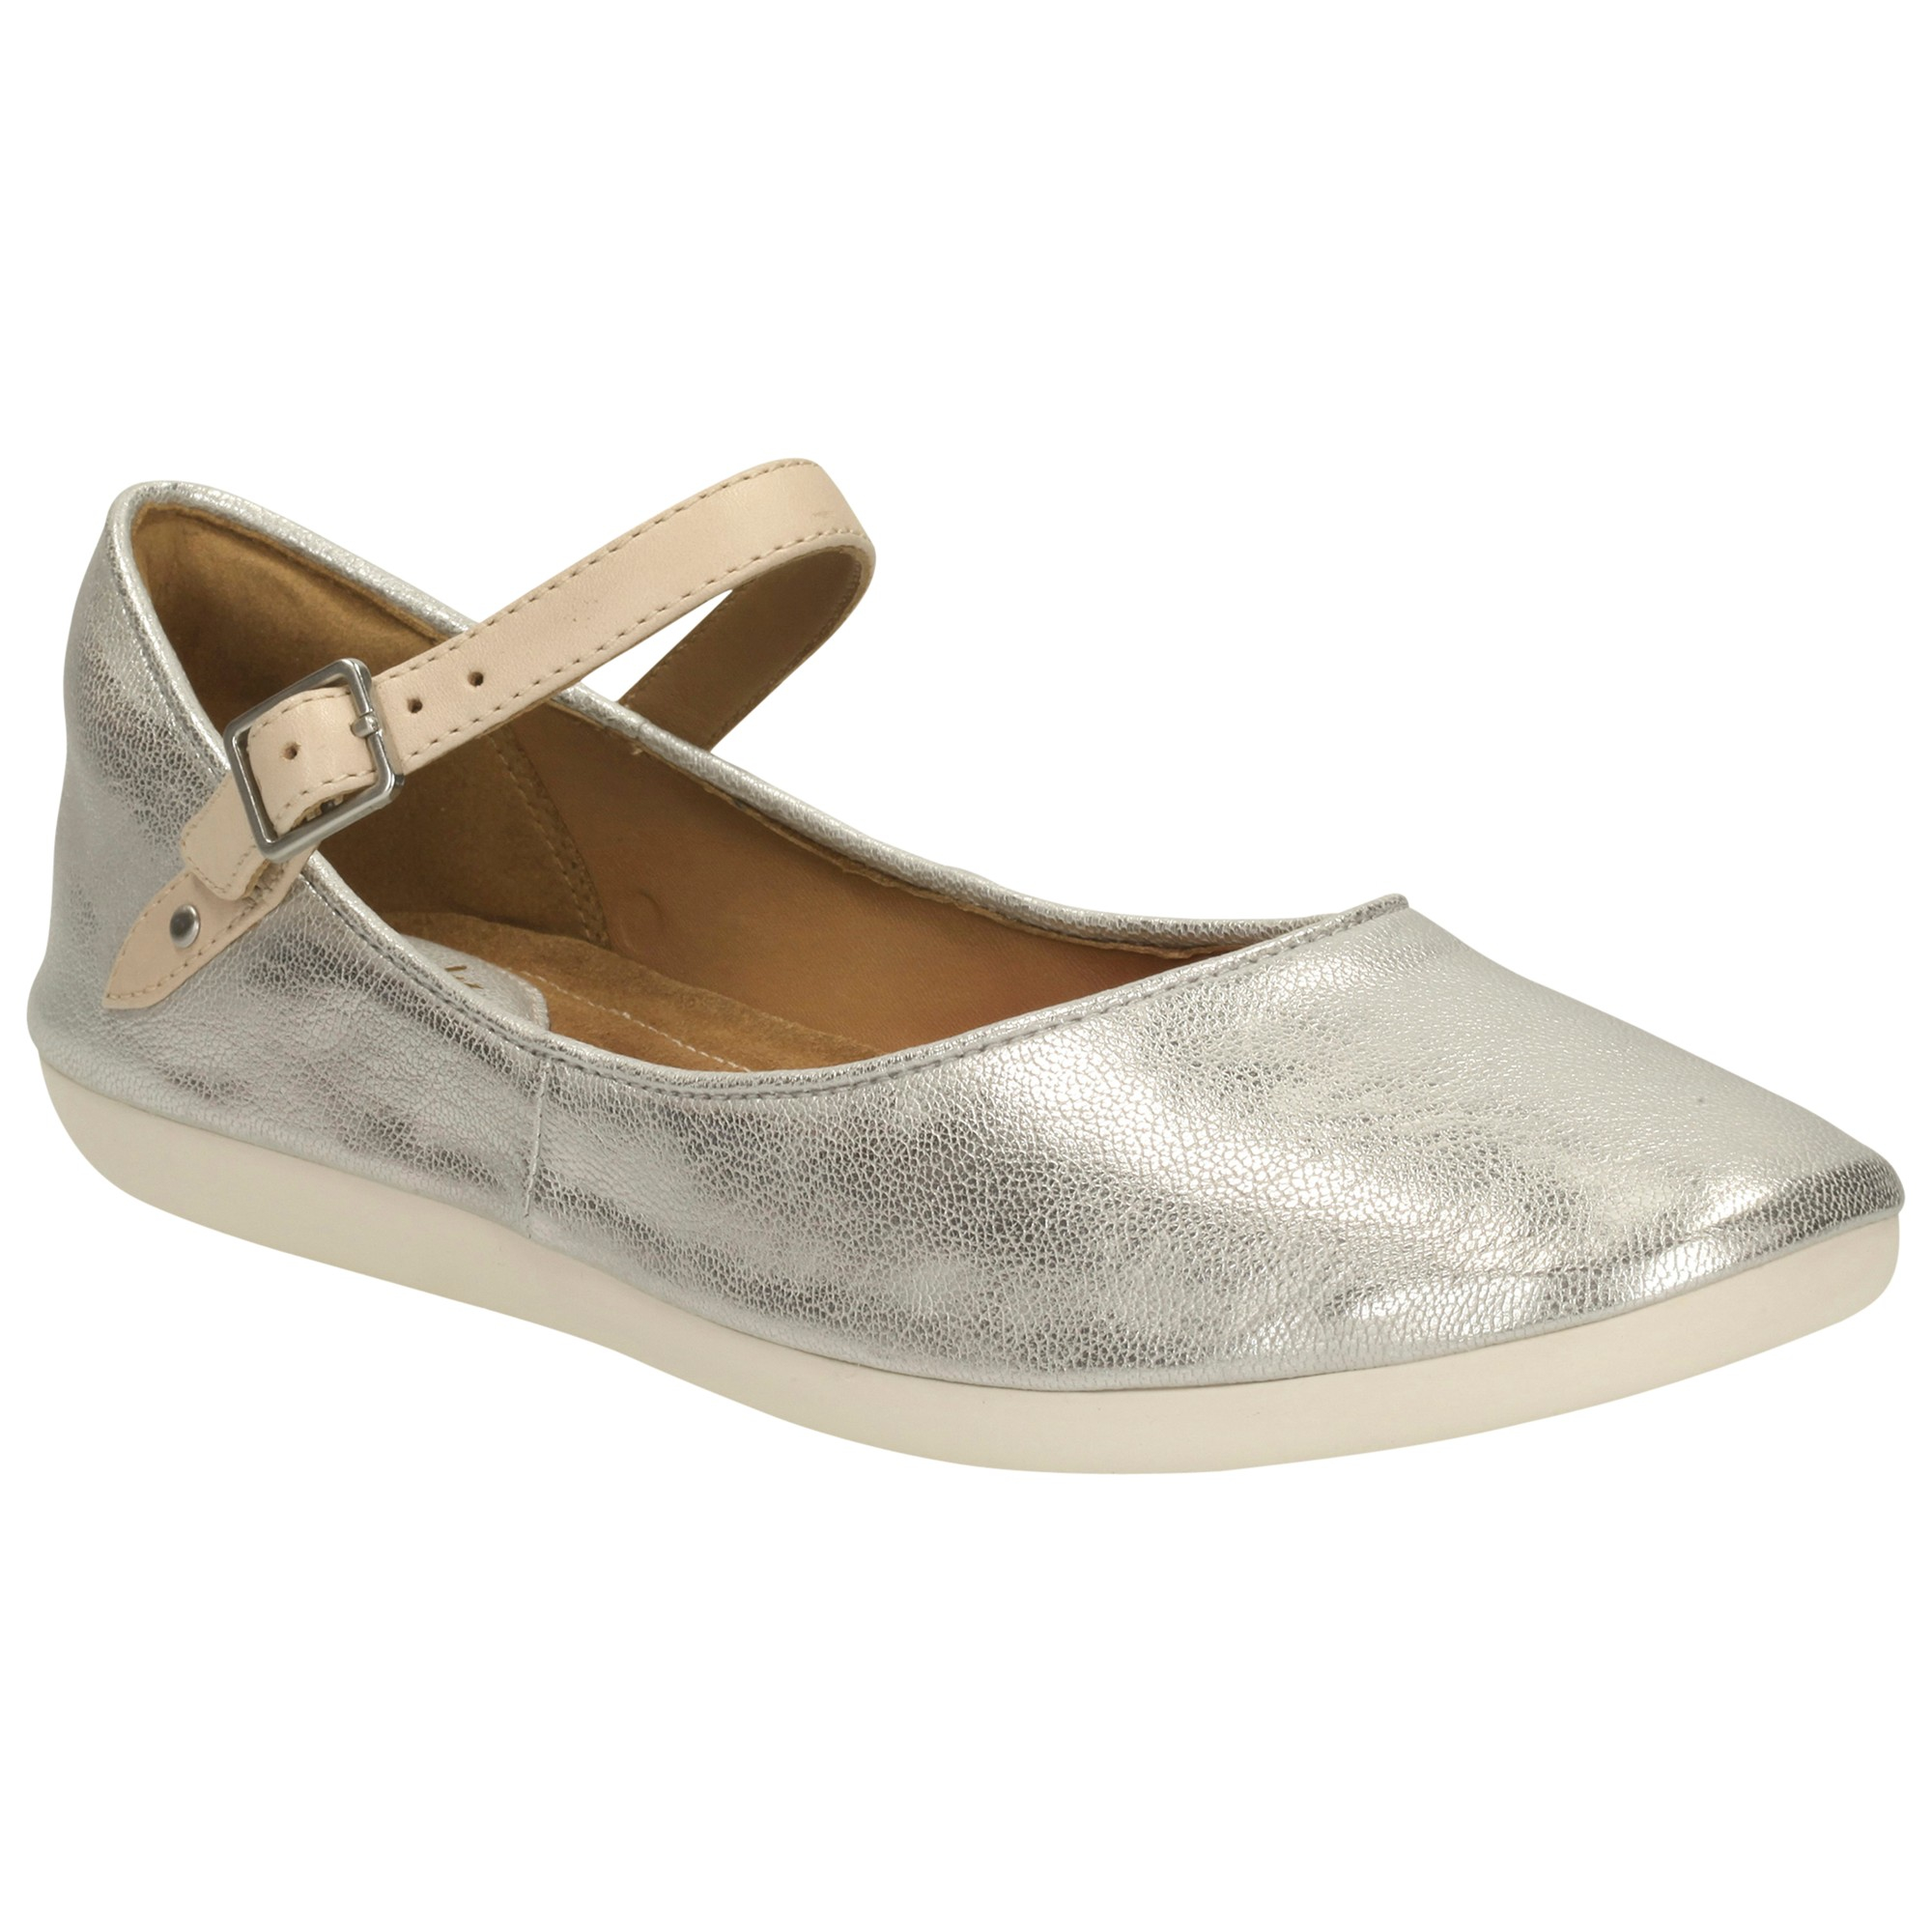 Clarks Feature Film Leather Pumps in Silver (Metallic) - Lyst